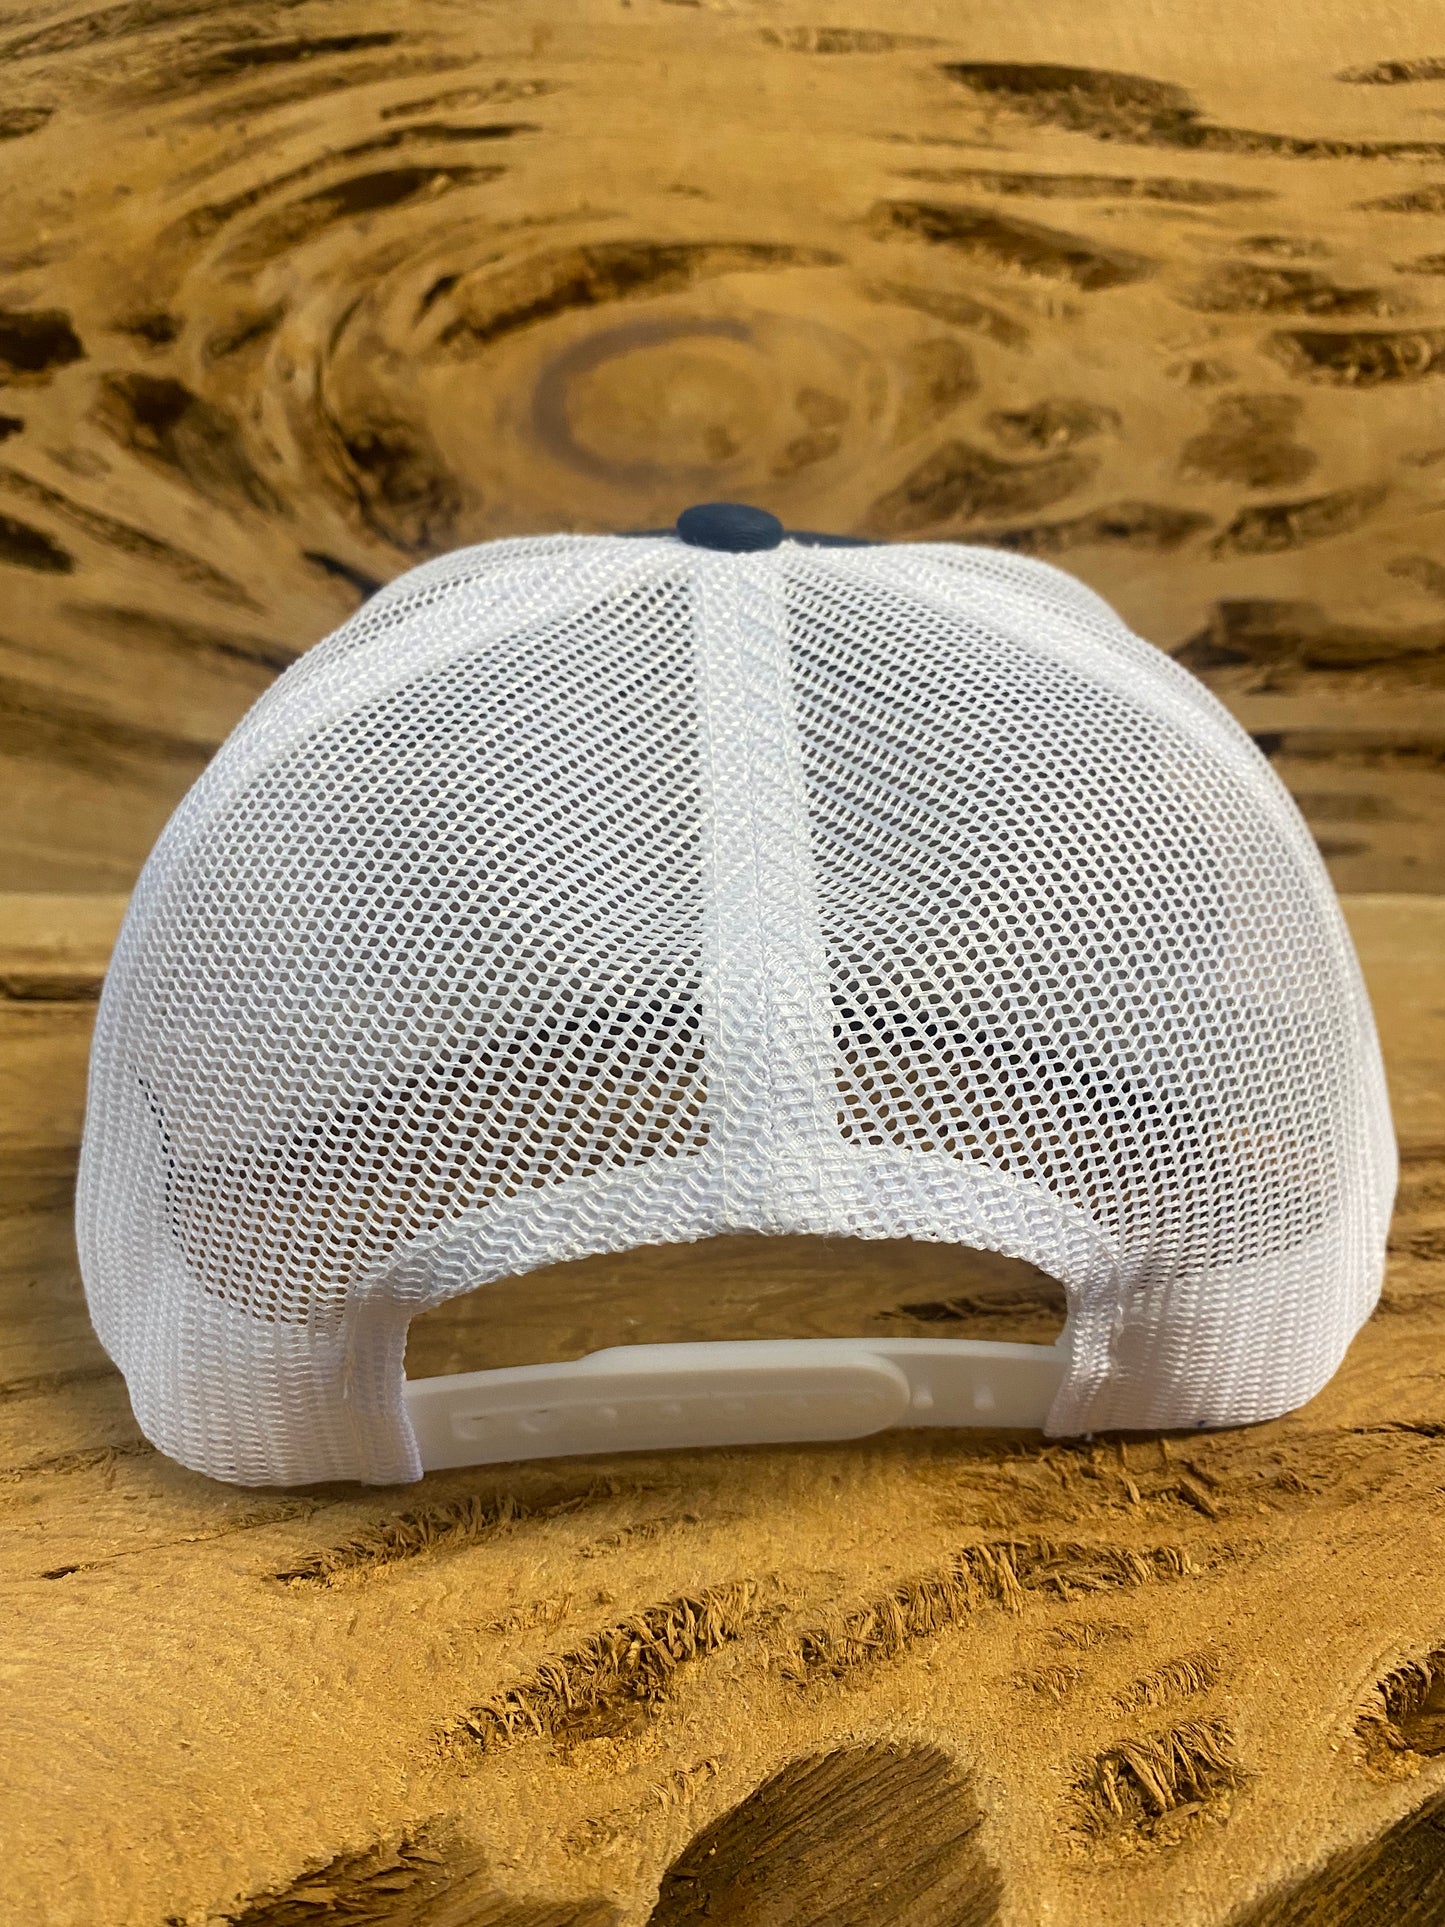 Mesh Snapback Cap with Leather Patch - Navy/White